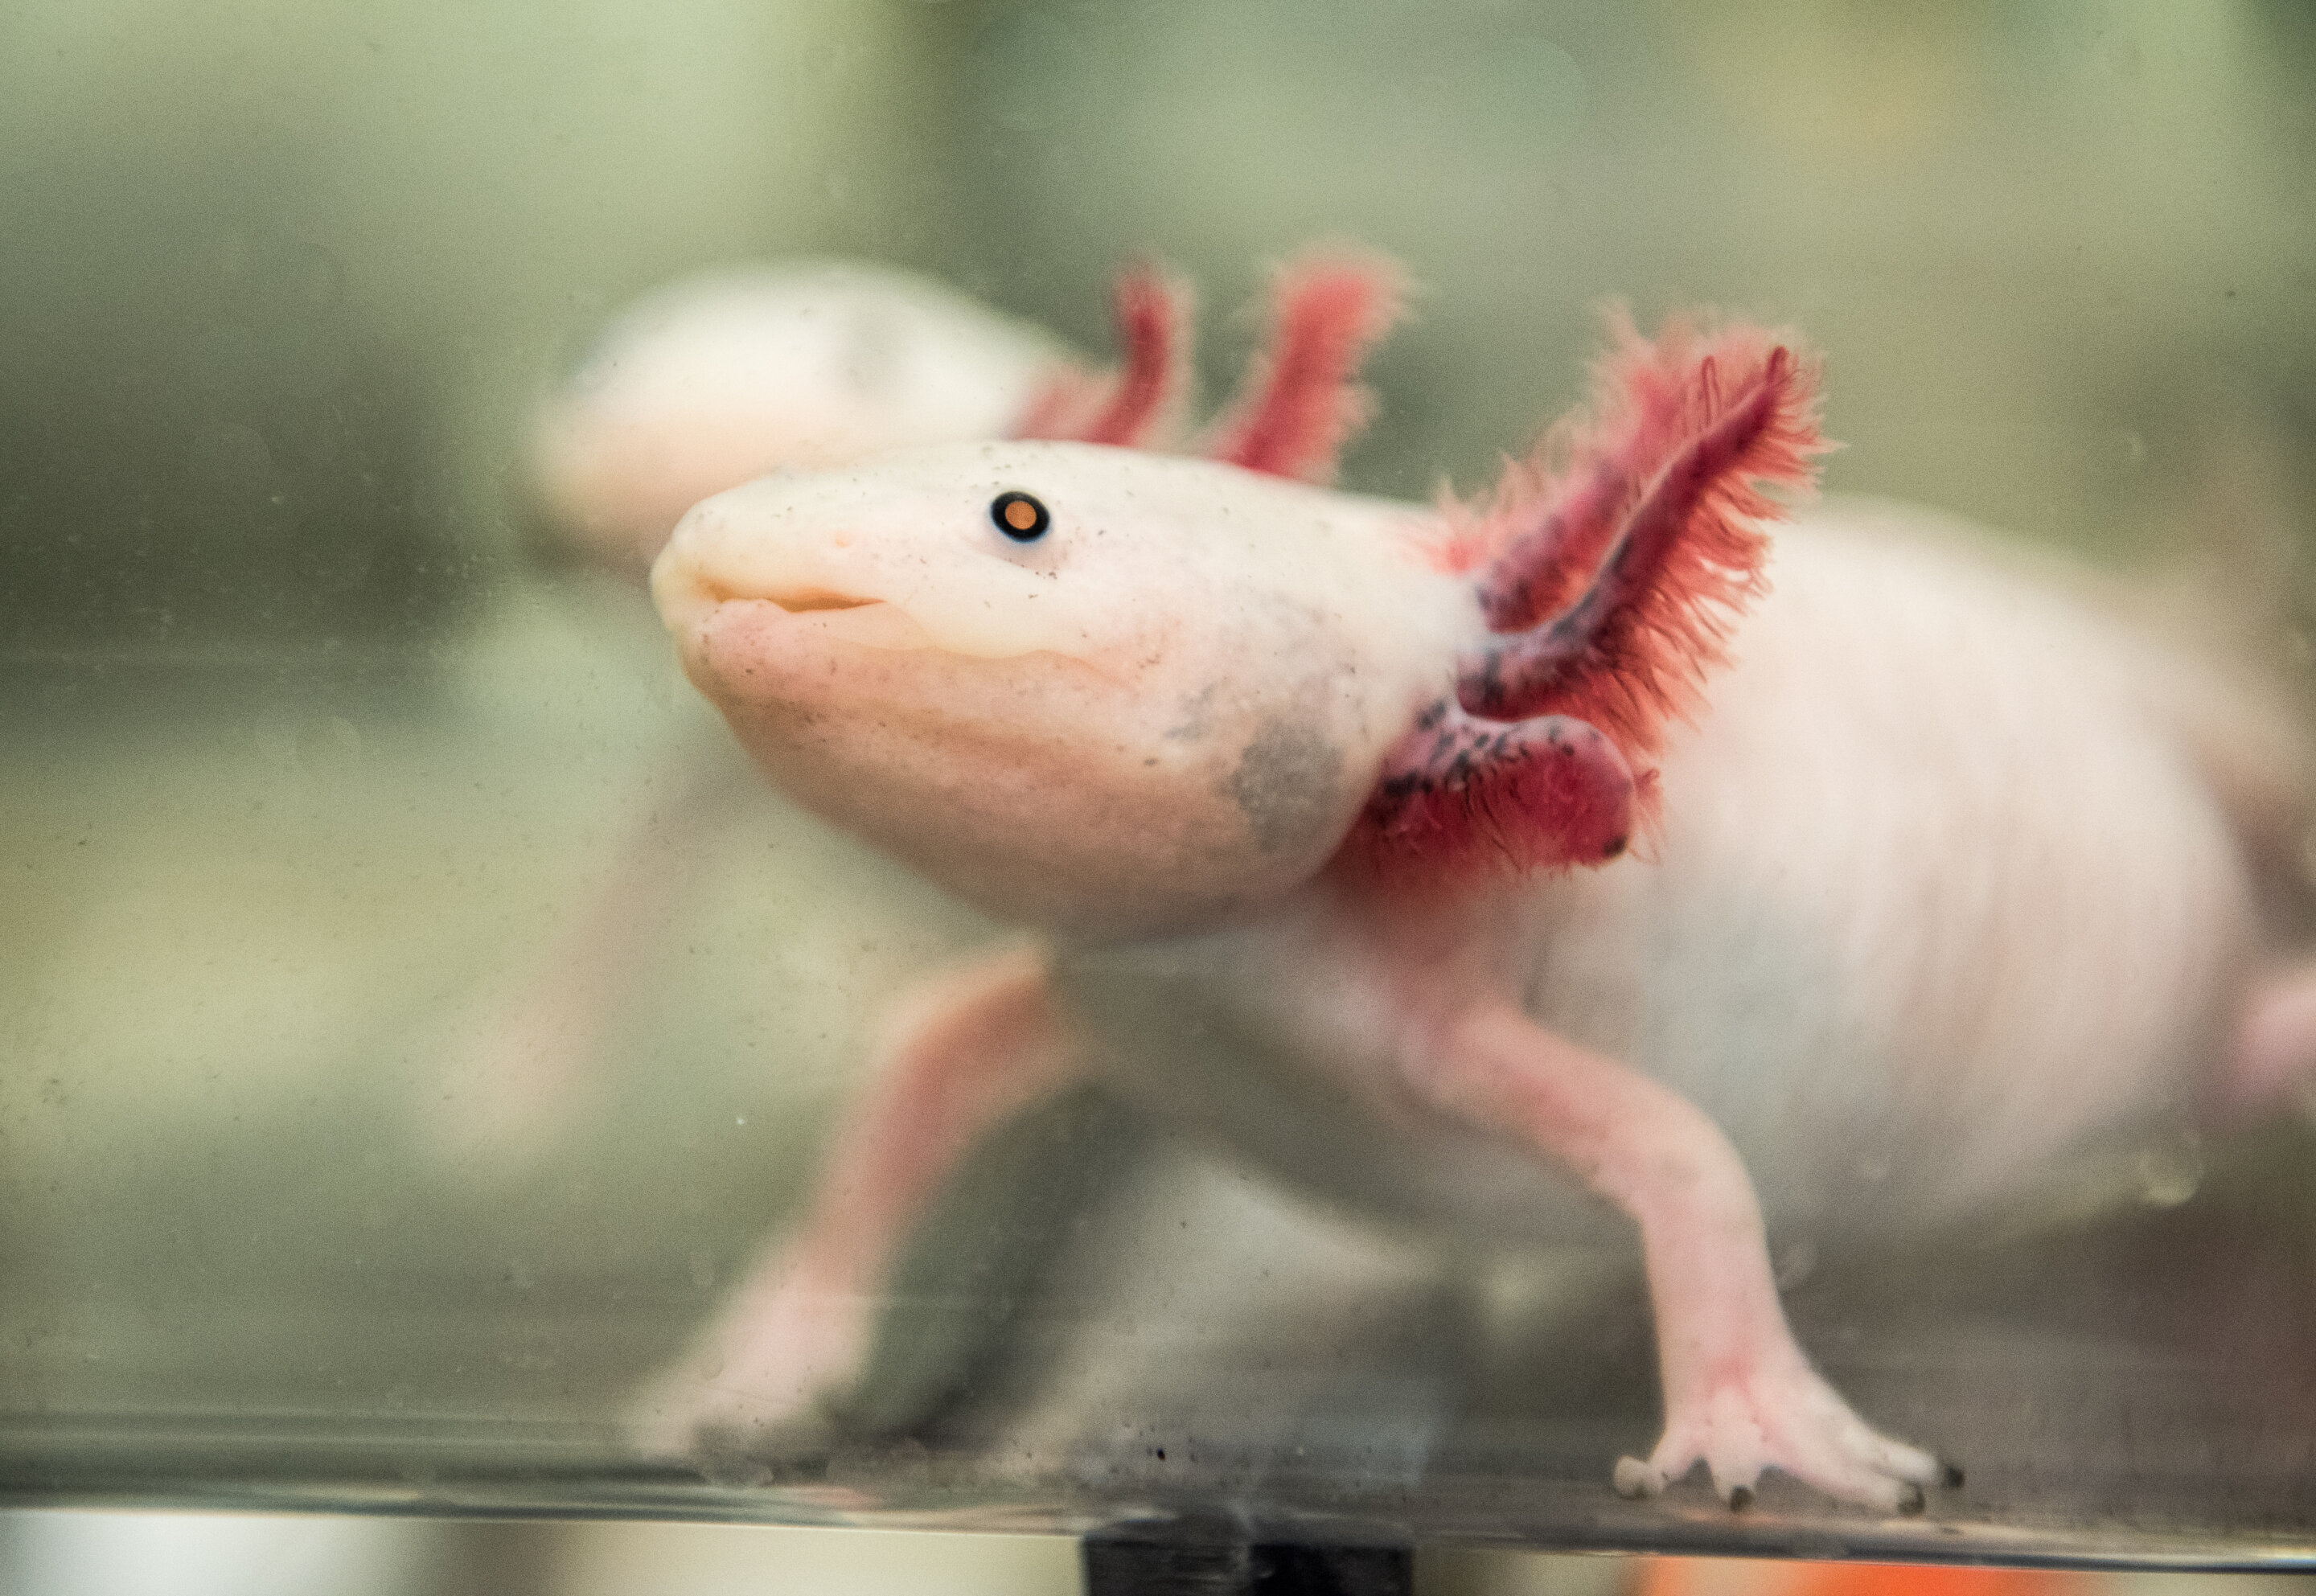 #The scientist helping to develop the axolotl as a model